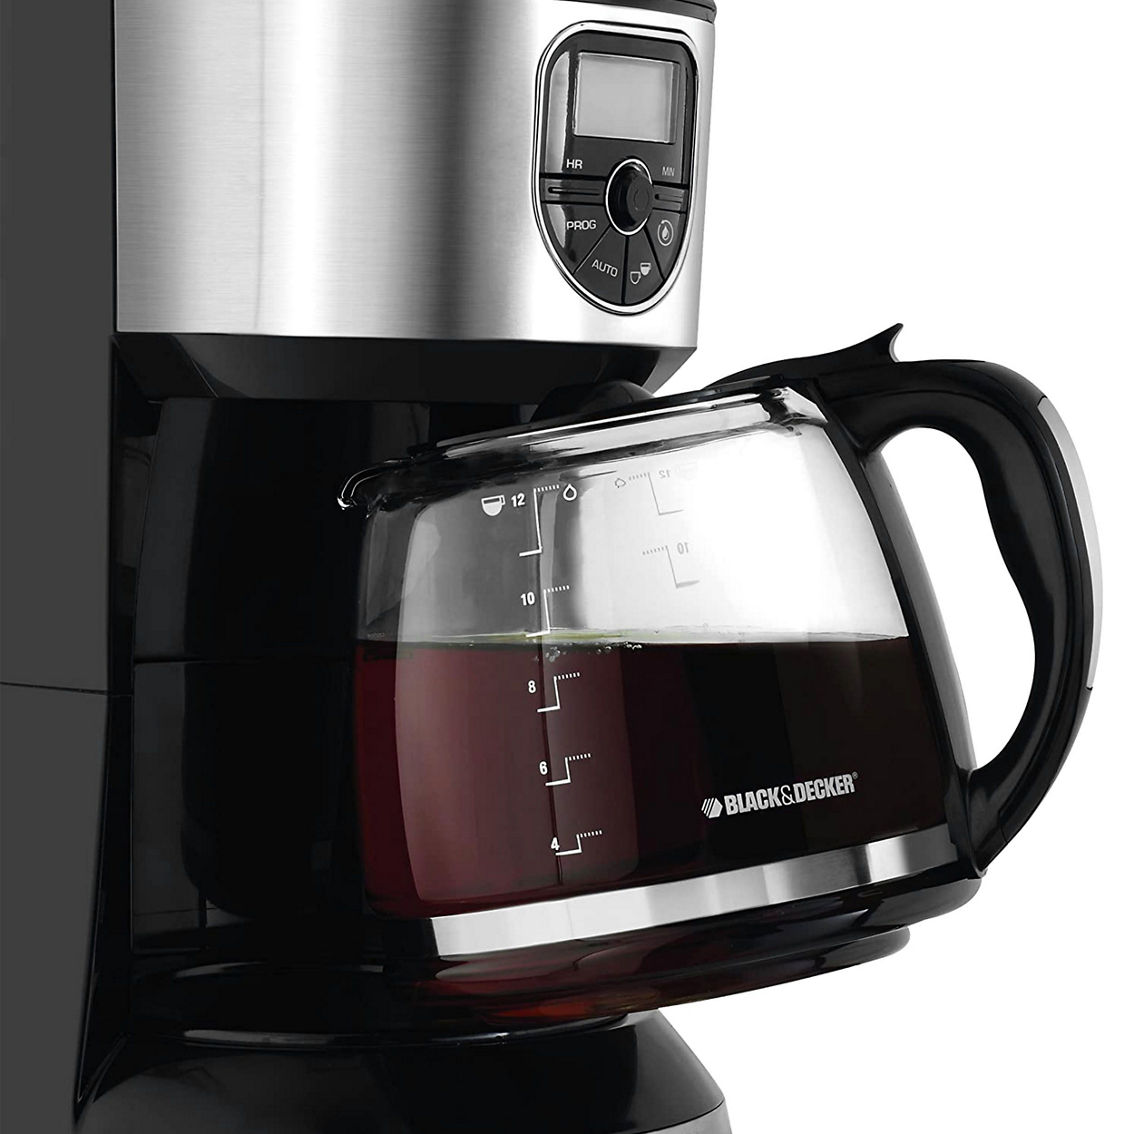 Black and Decker 12 Cup Programmable Coffeemaker in Black and Silver - Image 4 of 5